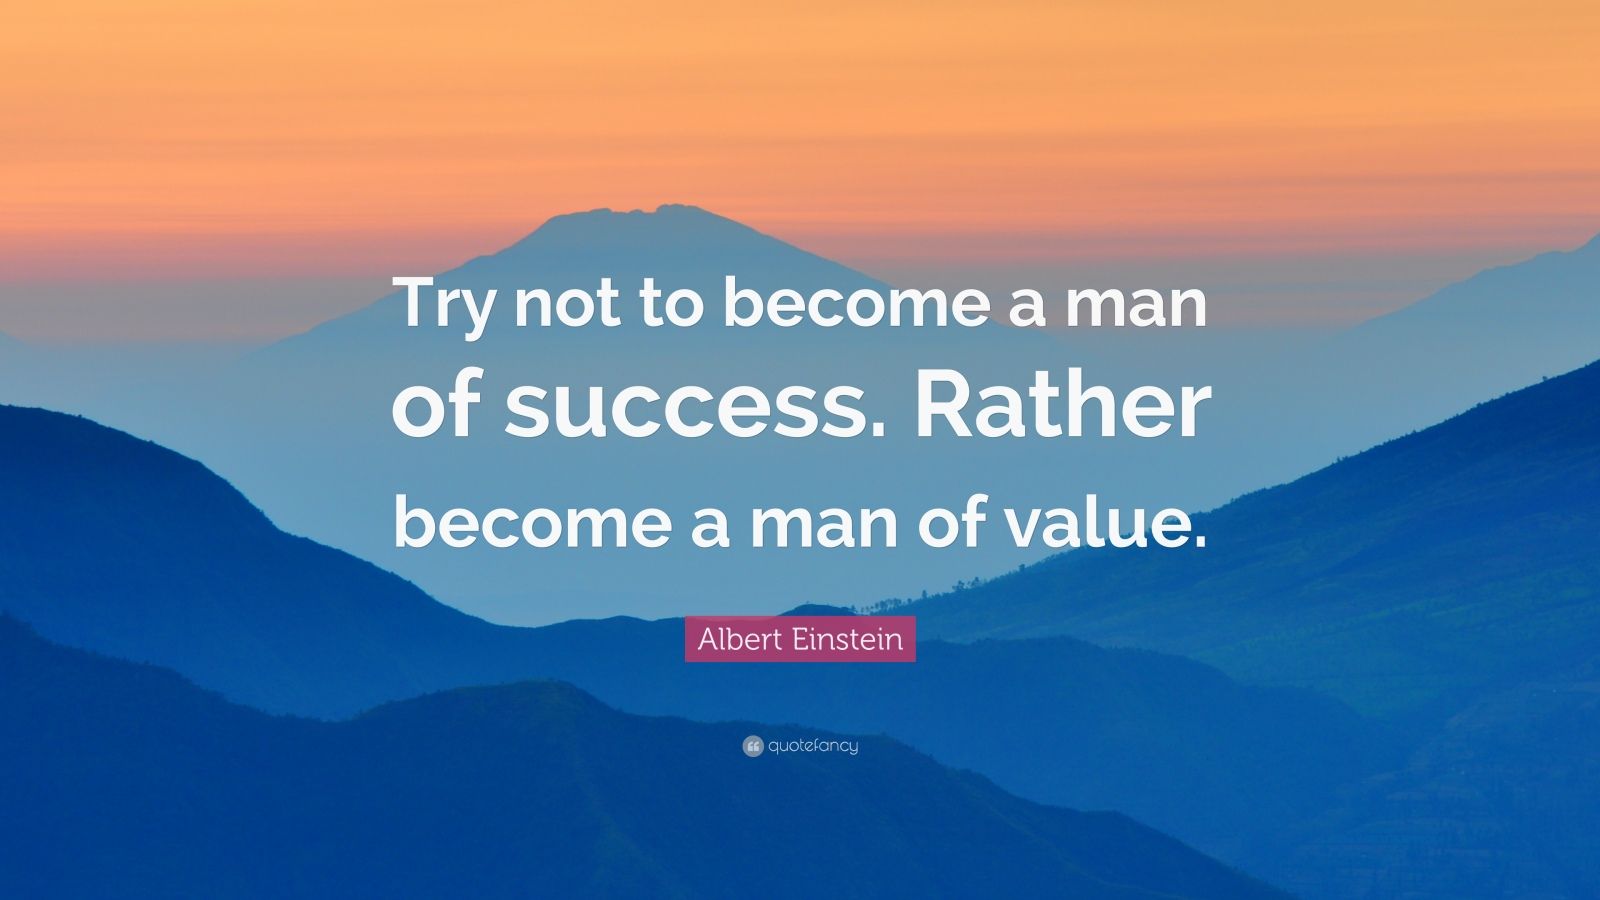 Albert Einstein Quote: “Try not to become a man of success. Rather